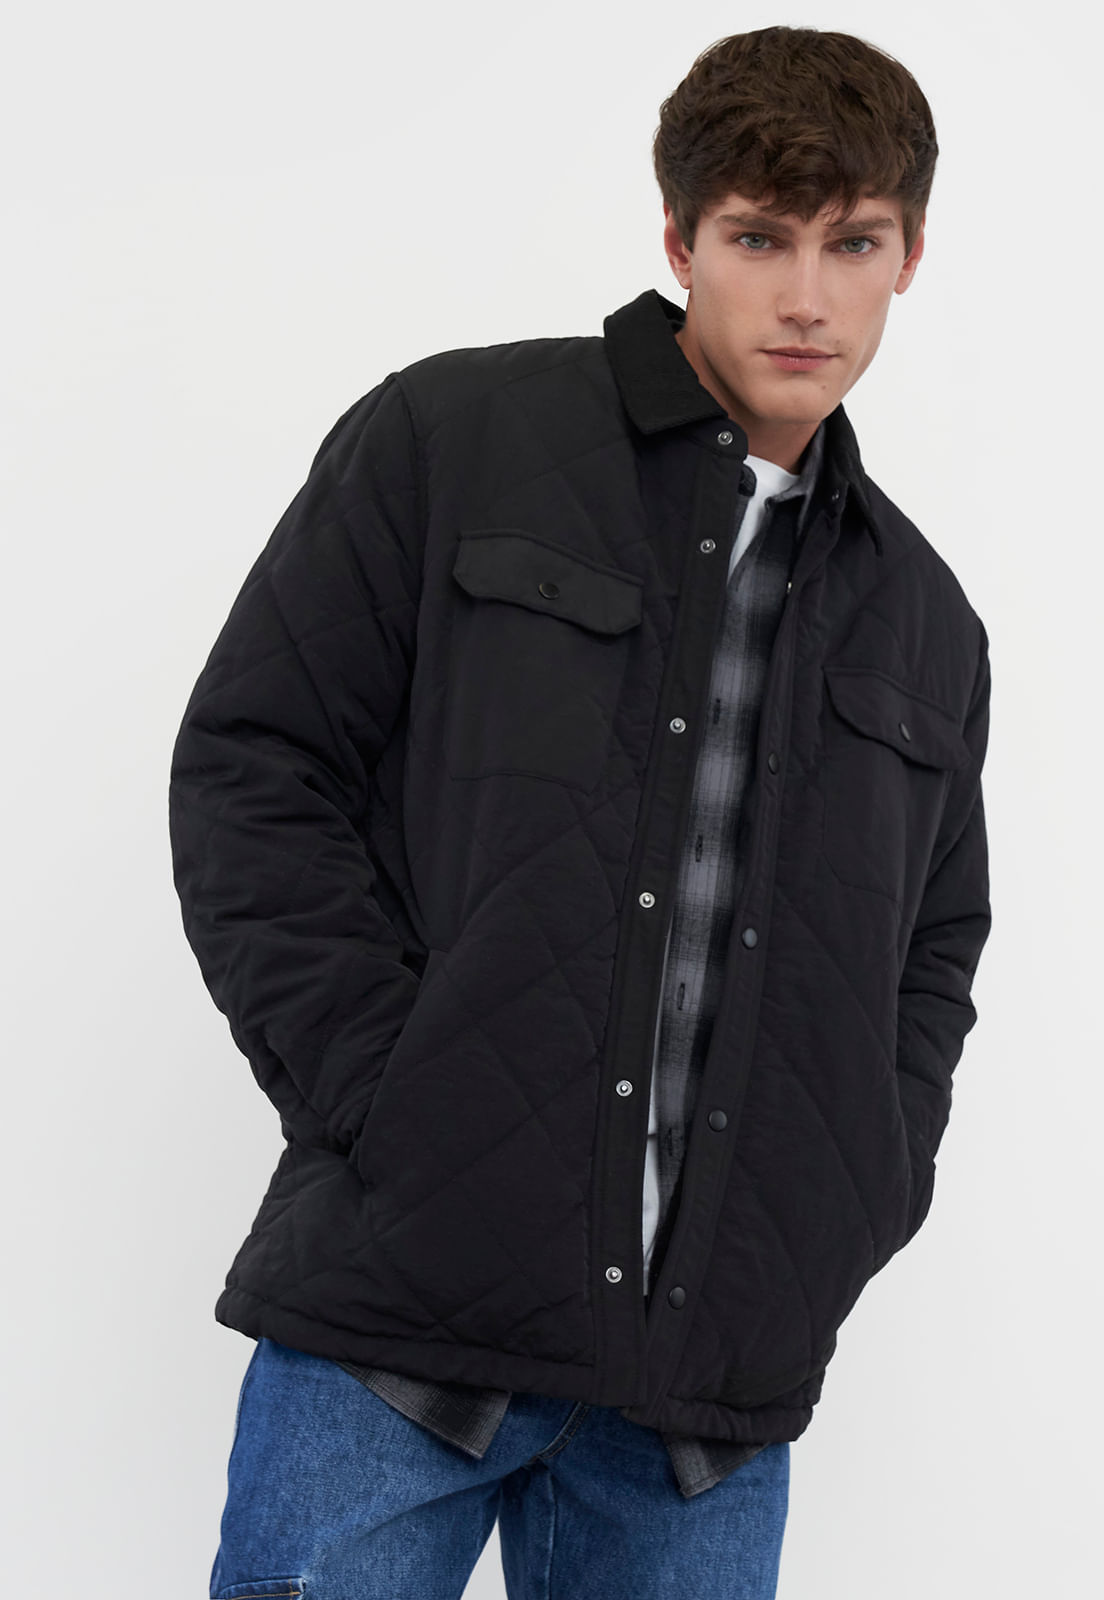 Chaqueta Hombre Quilted Chiporro Negro